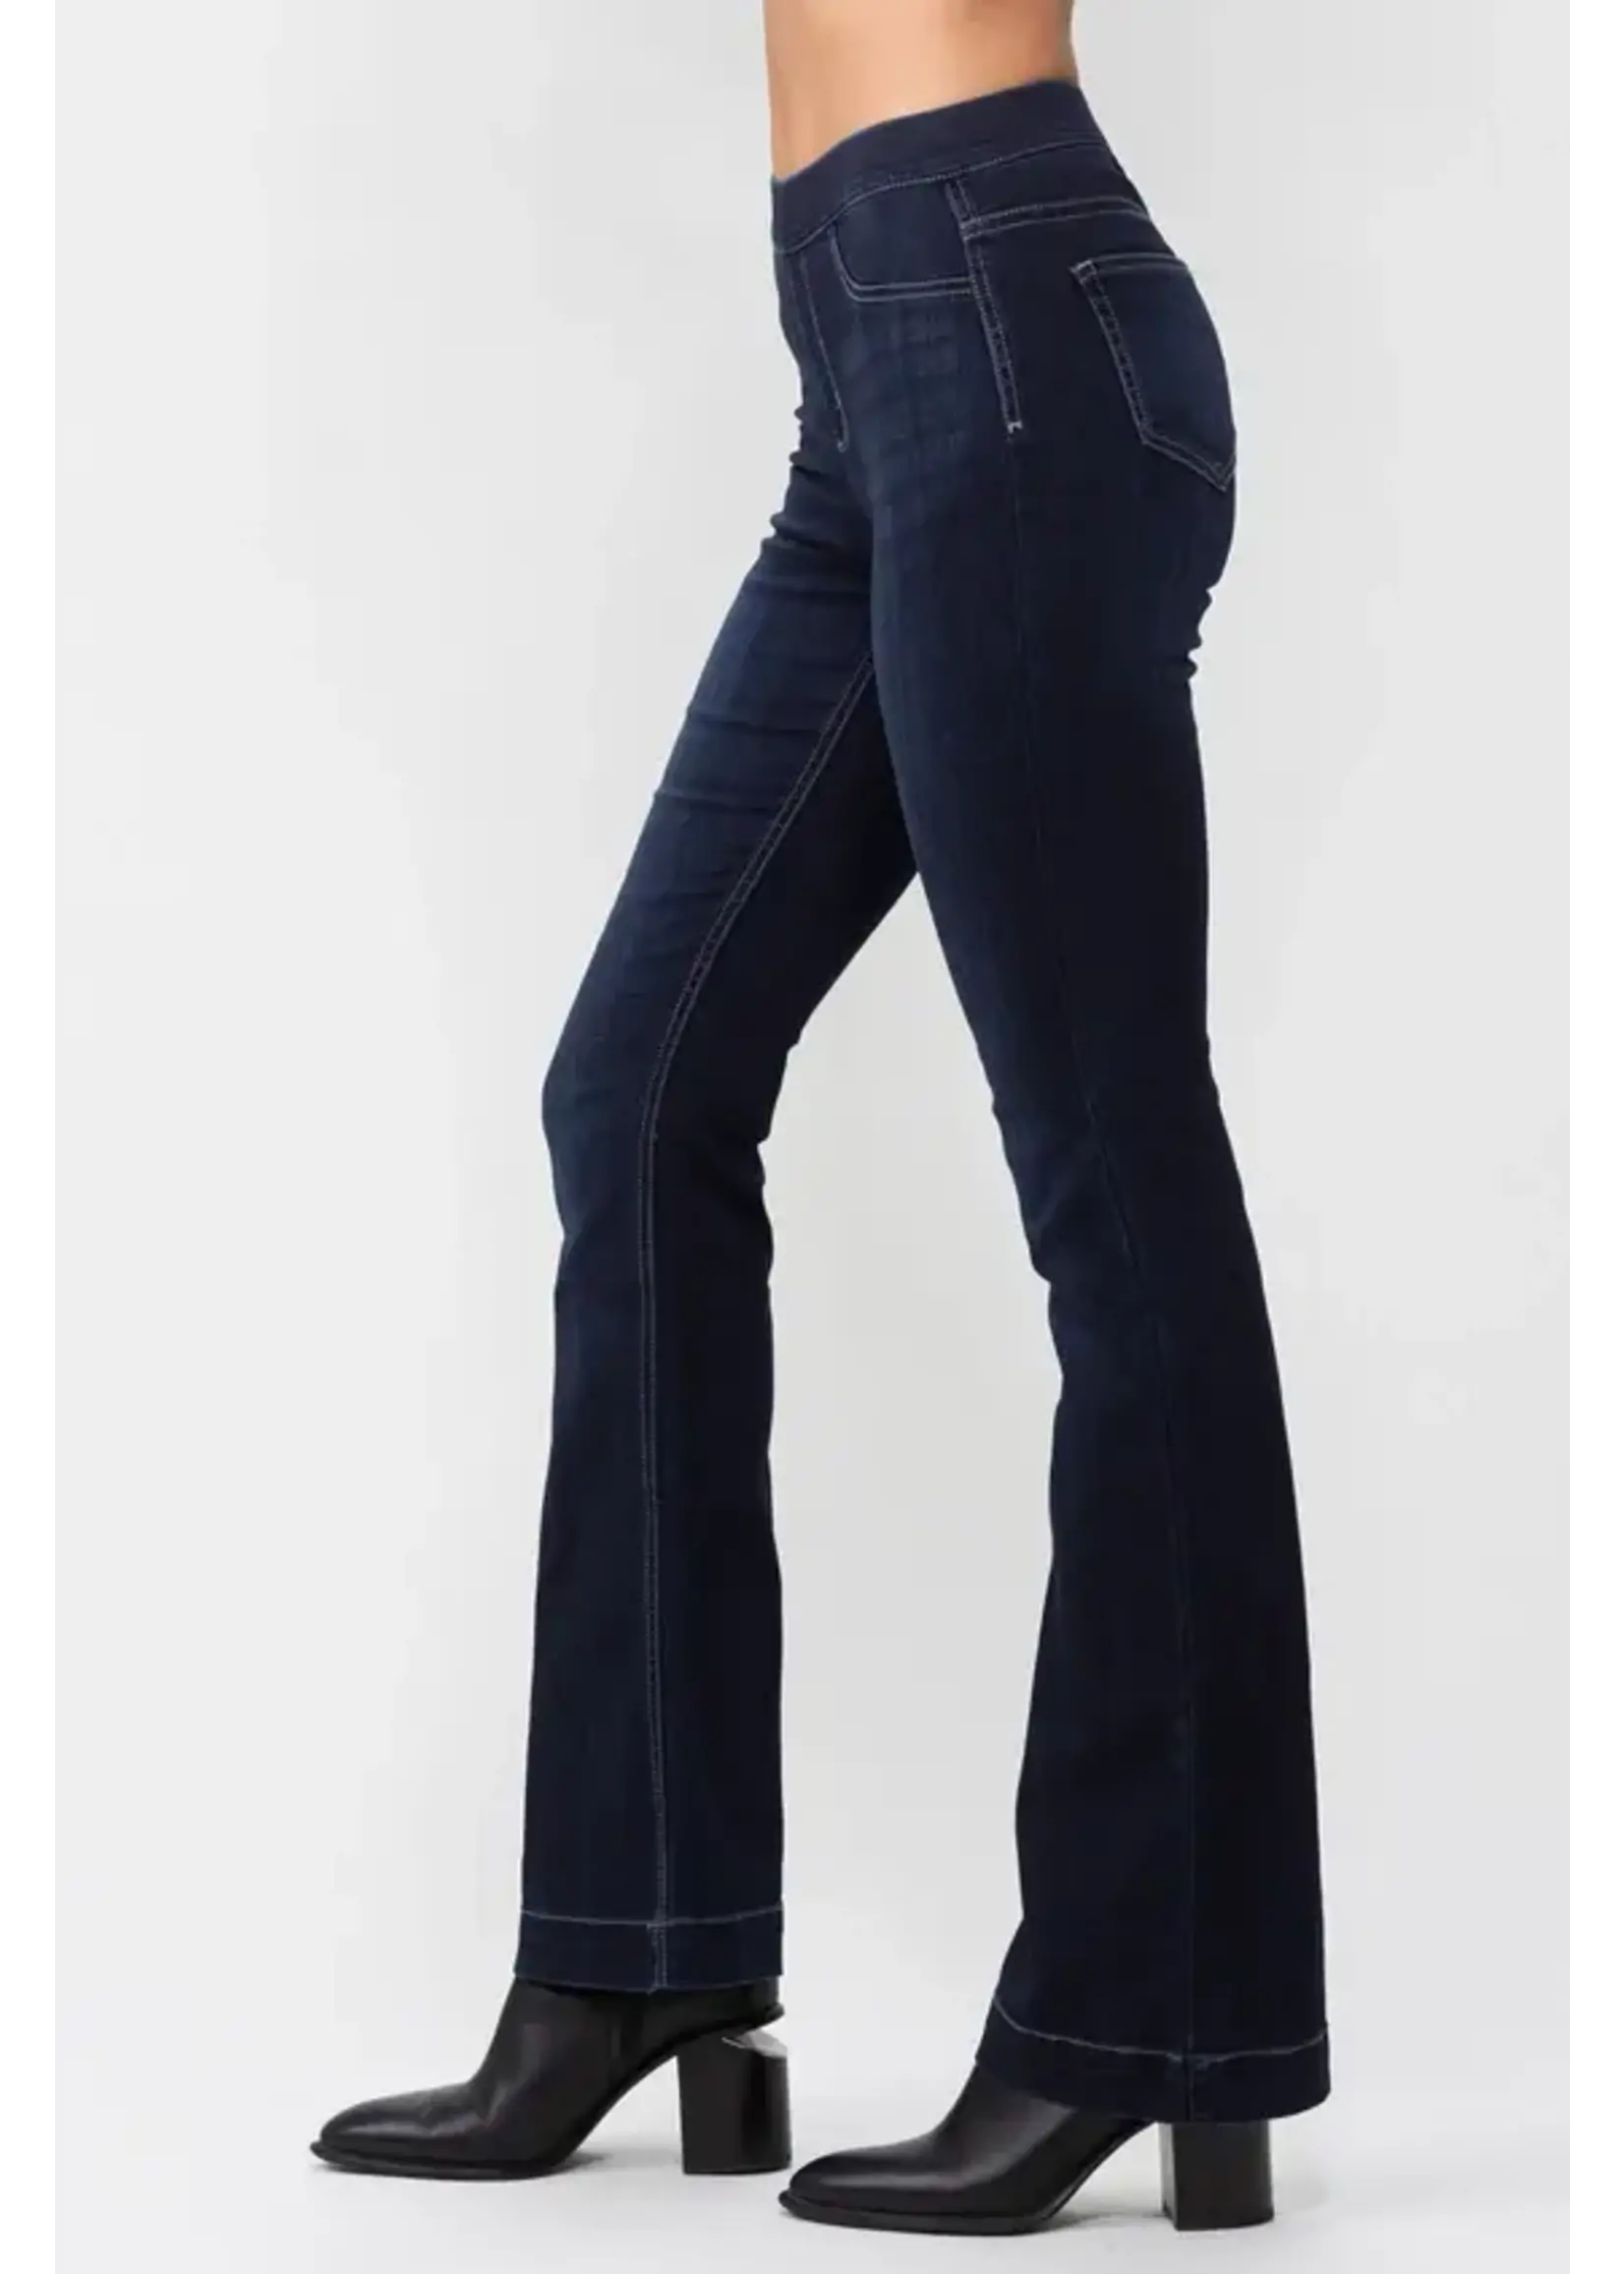 Jelly Jeans Mid Rise Pull on Flares